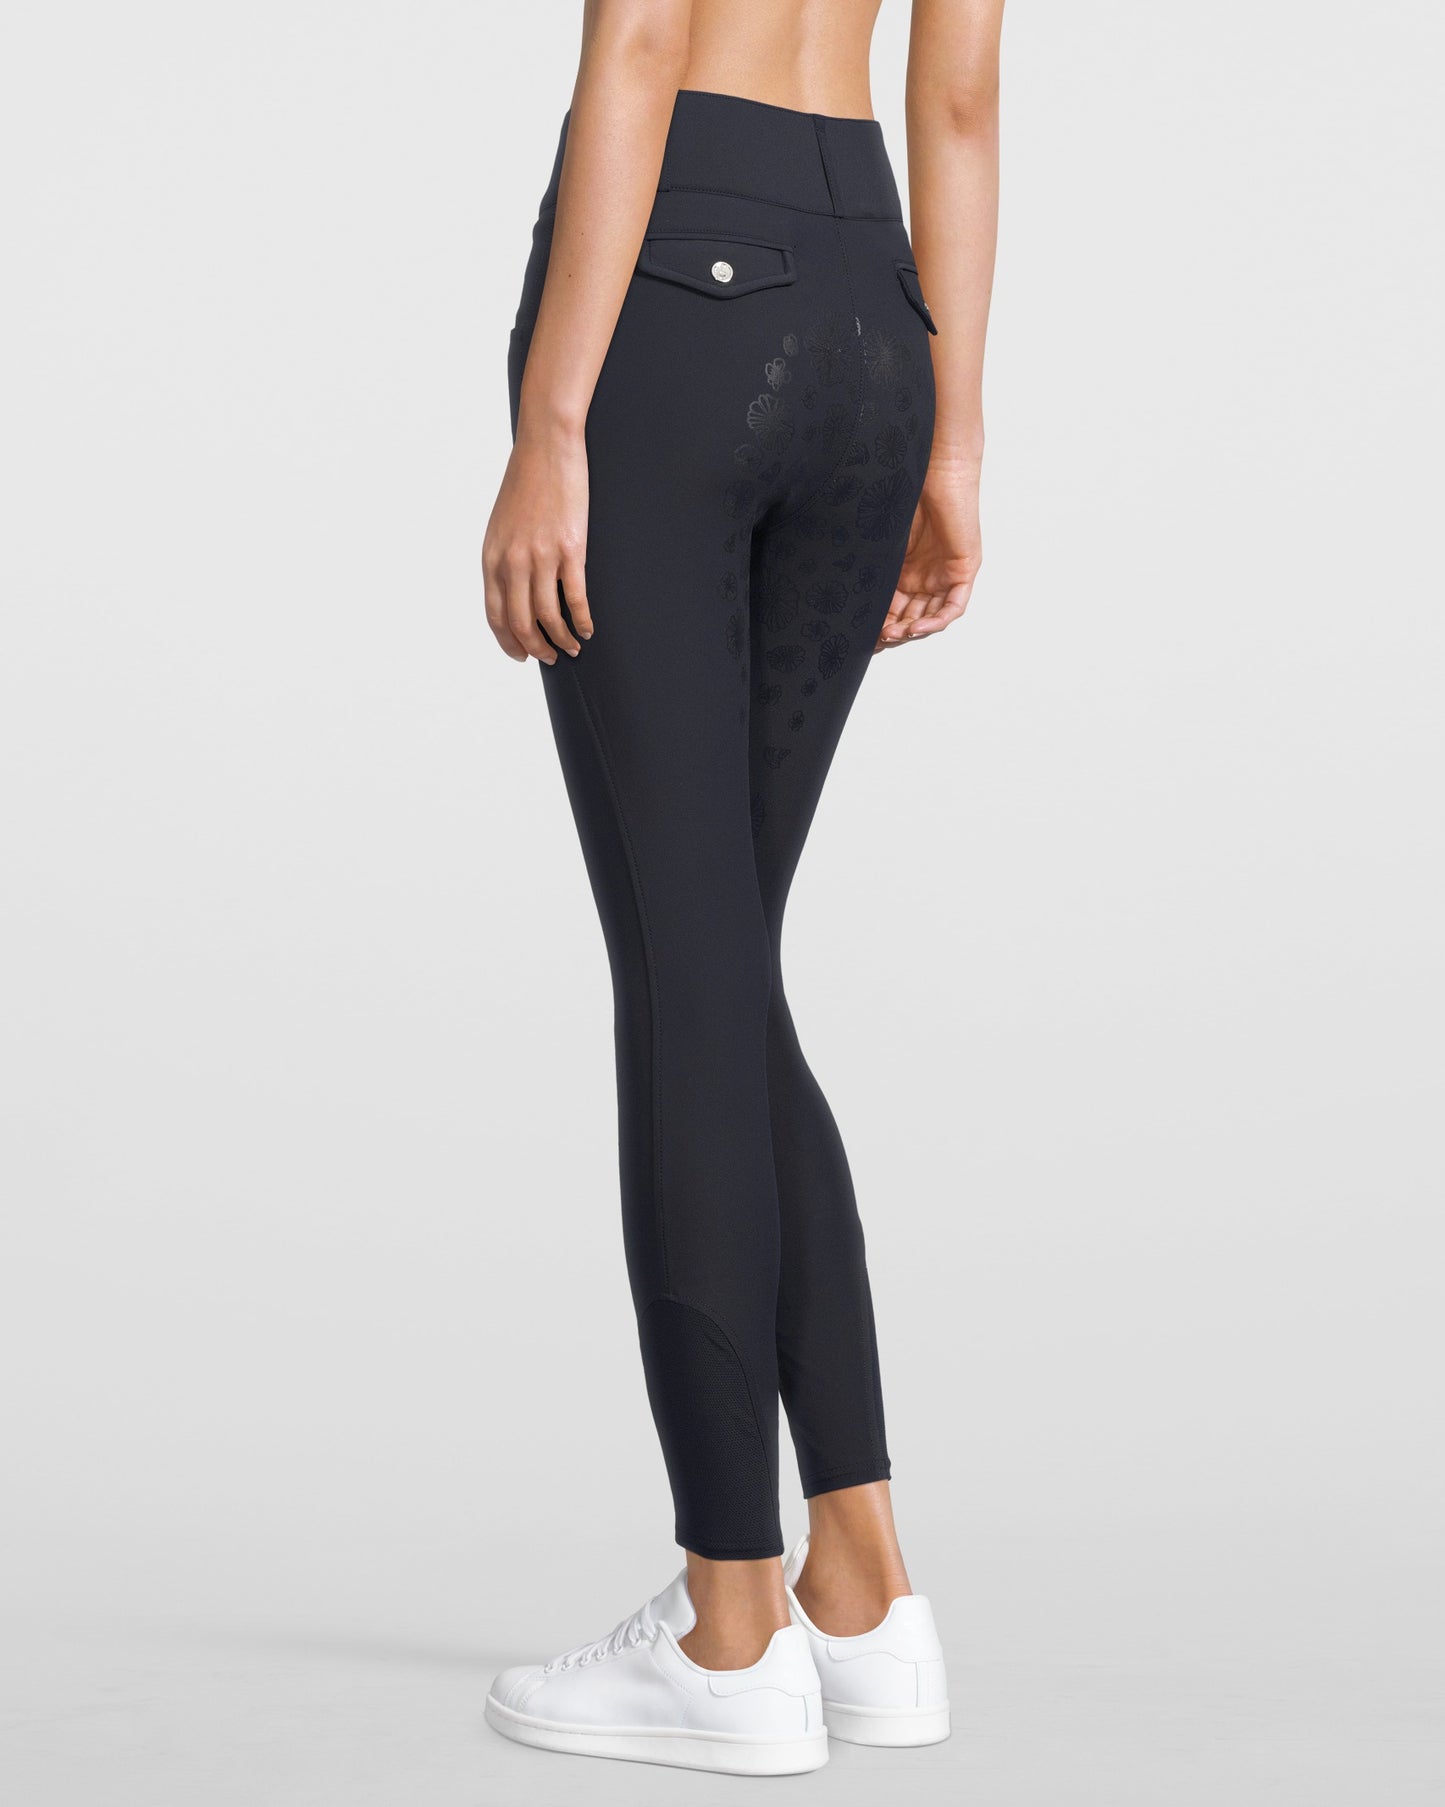 PS of Sweden Candice Breeches | Navy or Beige